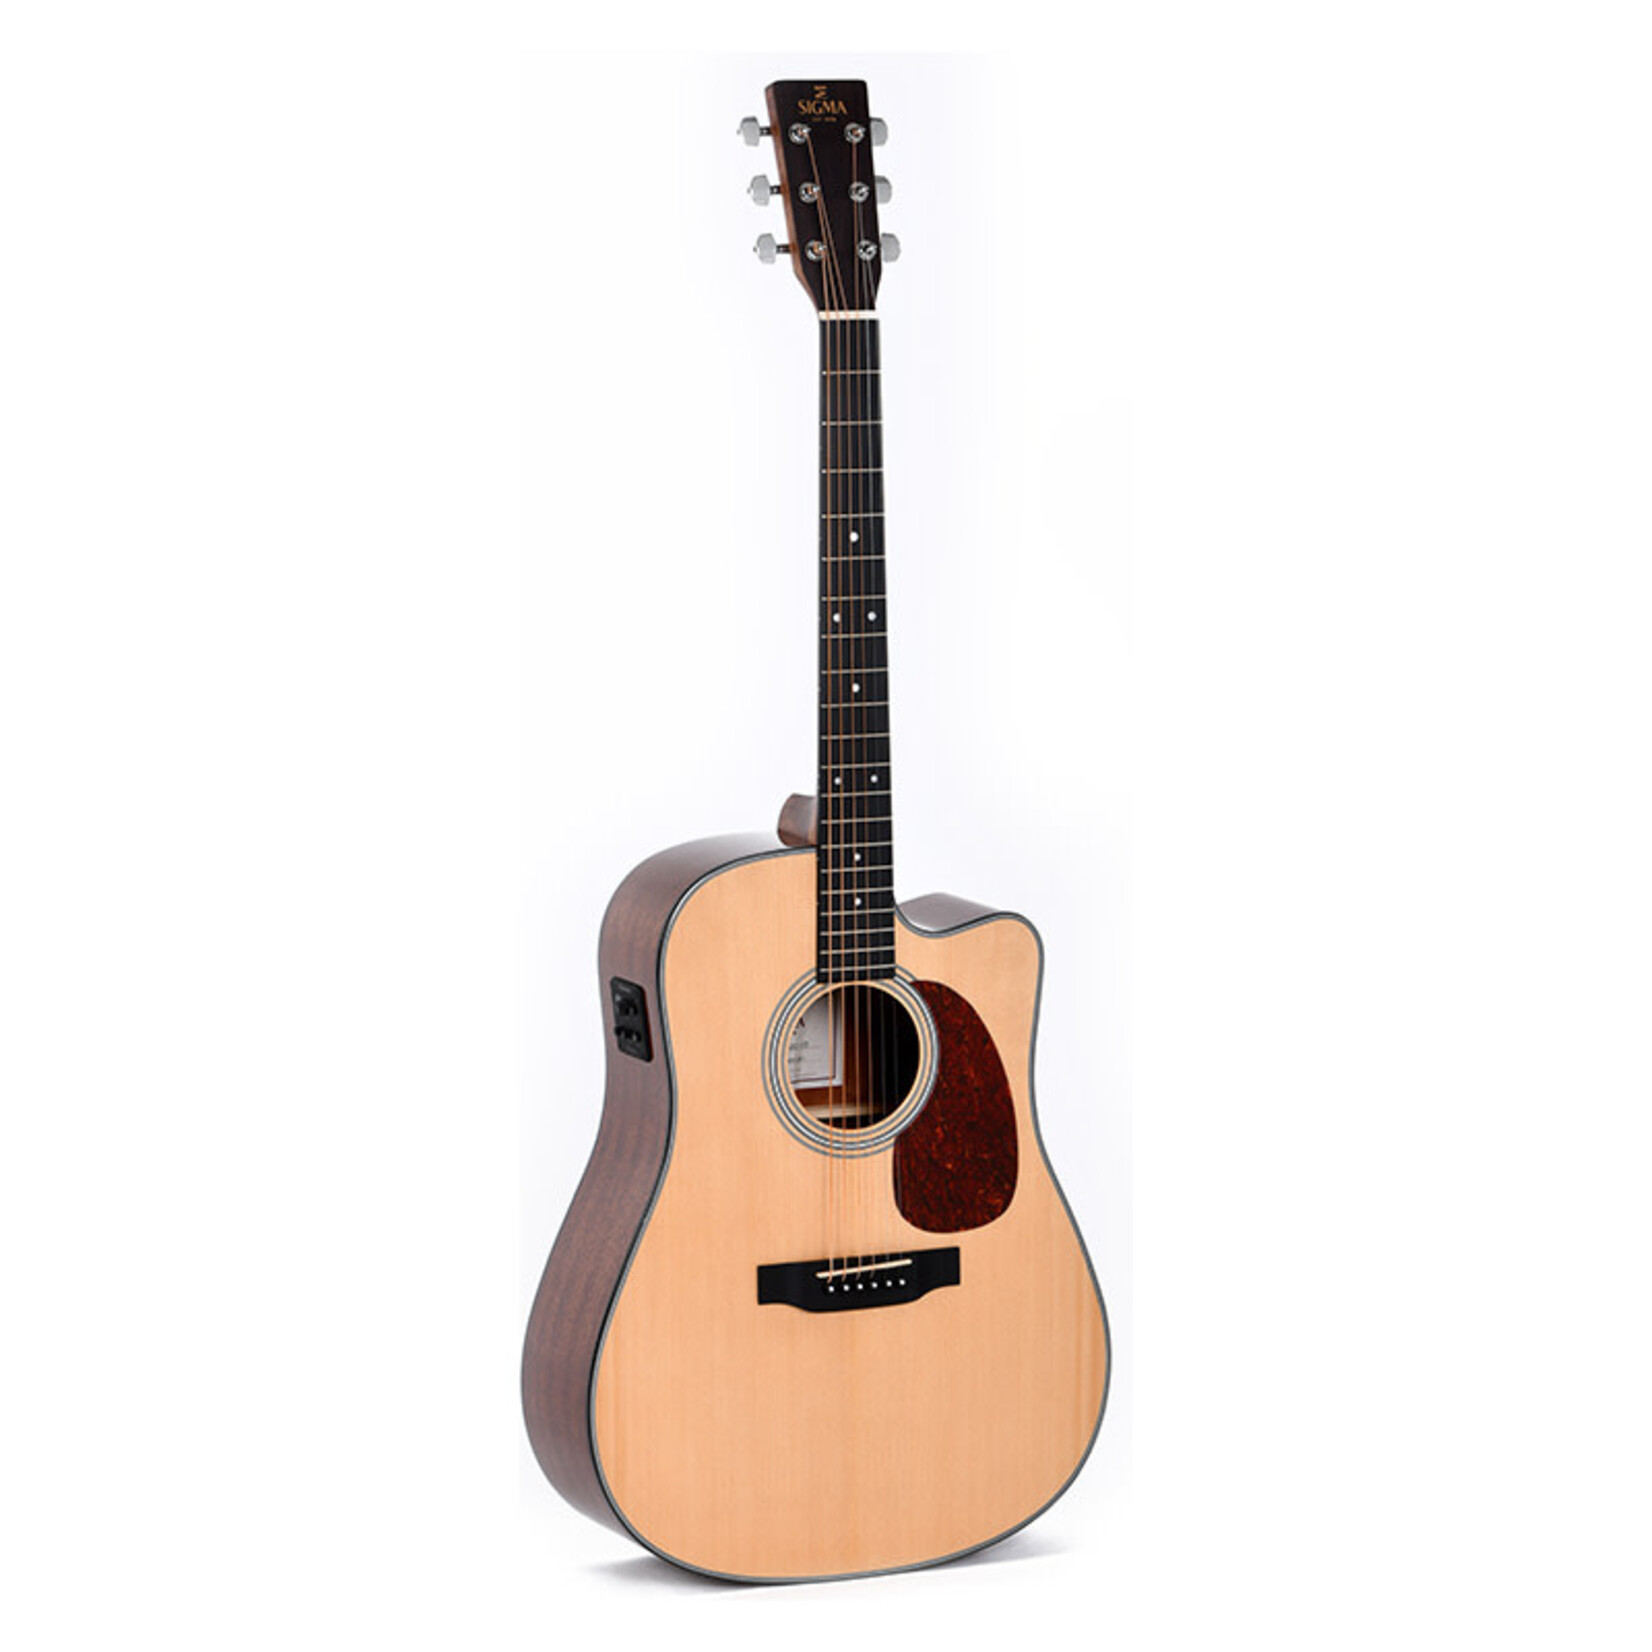 Sigma Sigma 1 Series - Solid Sitka Spruce,Dreadnought cutaway electro-acoustic - Natural Gloss